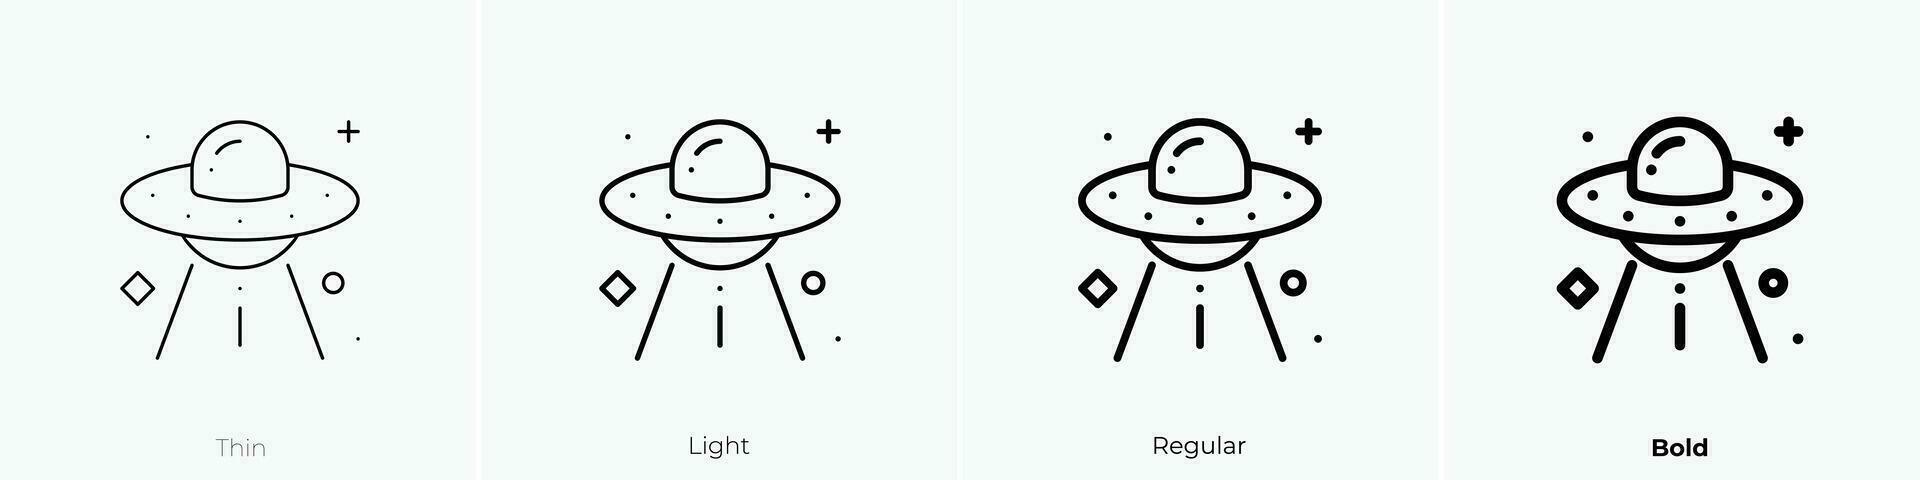 ufo icon. Thin, Light, Regular And Bold style design isolated on white background vector